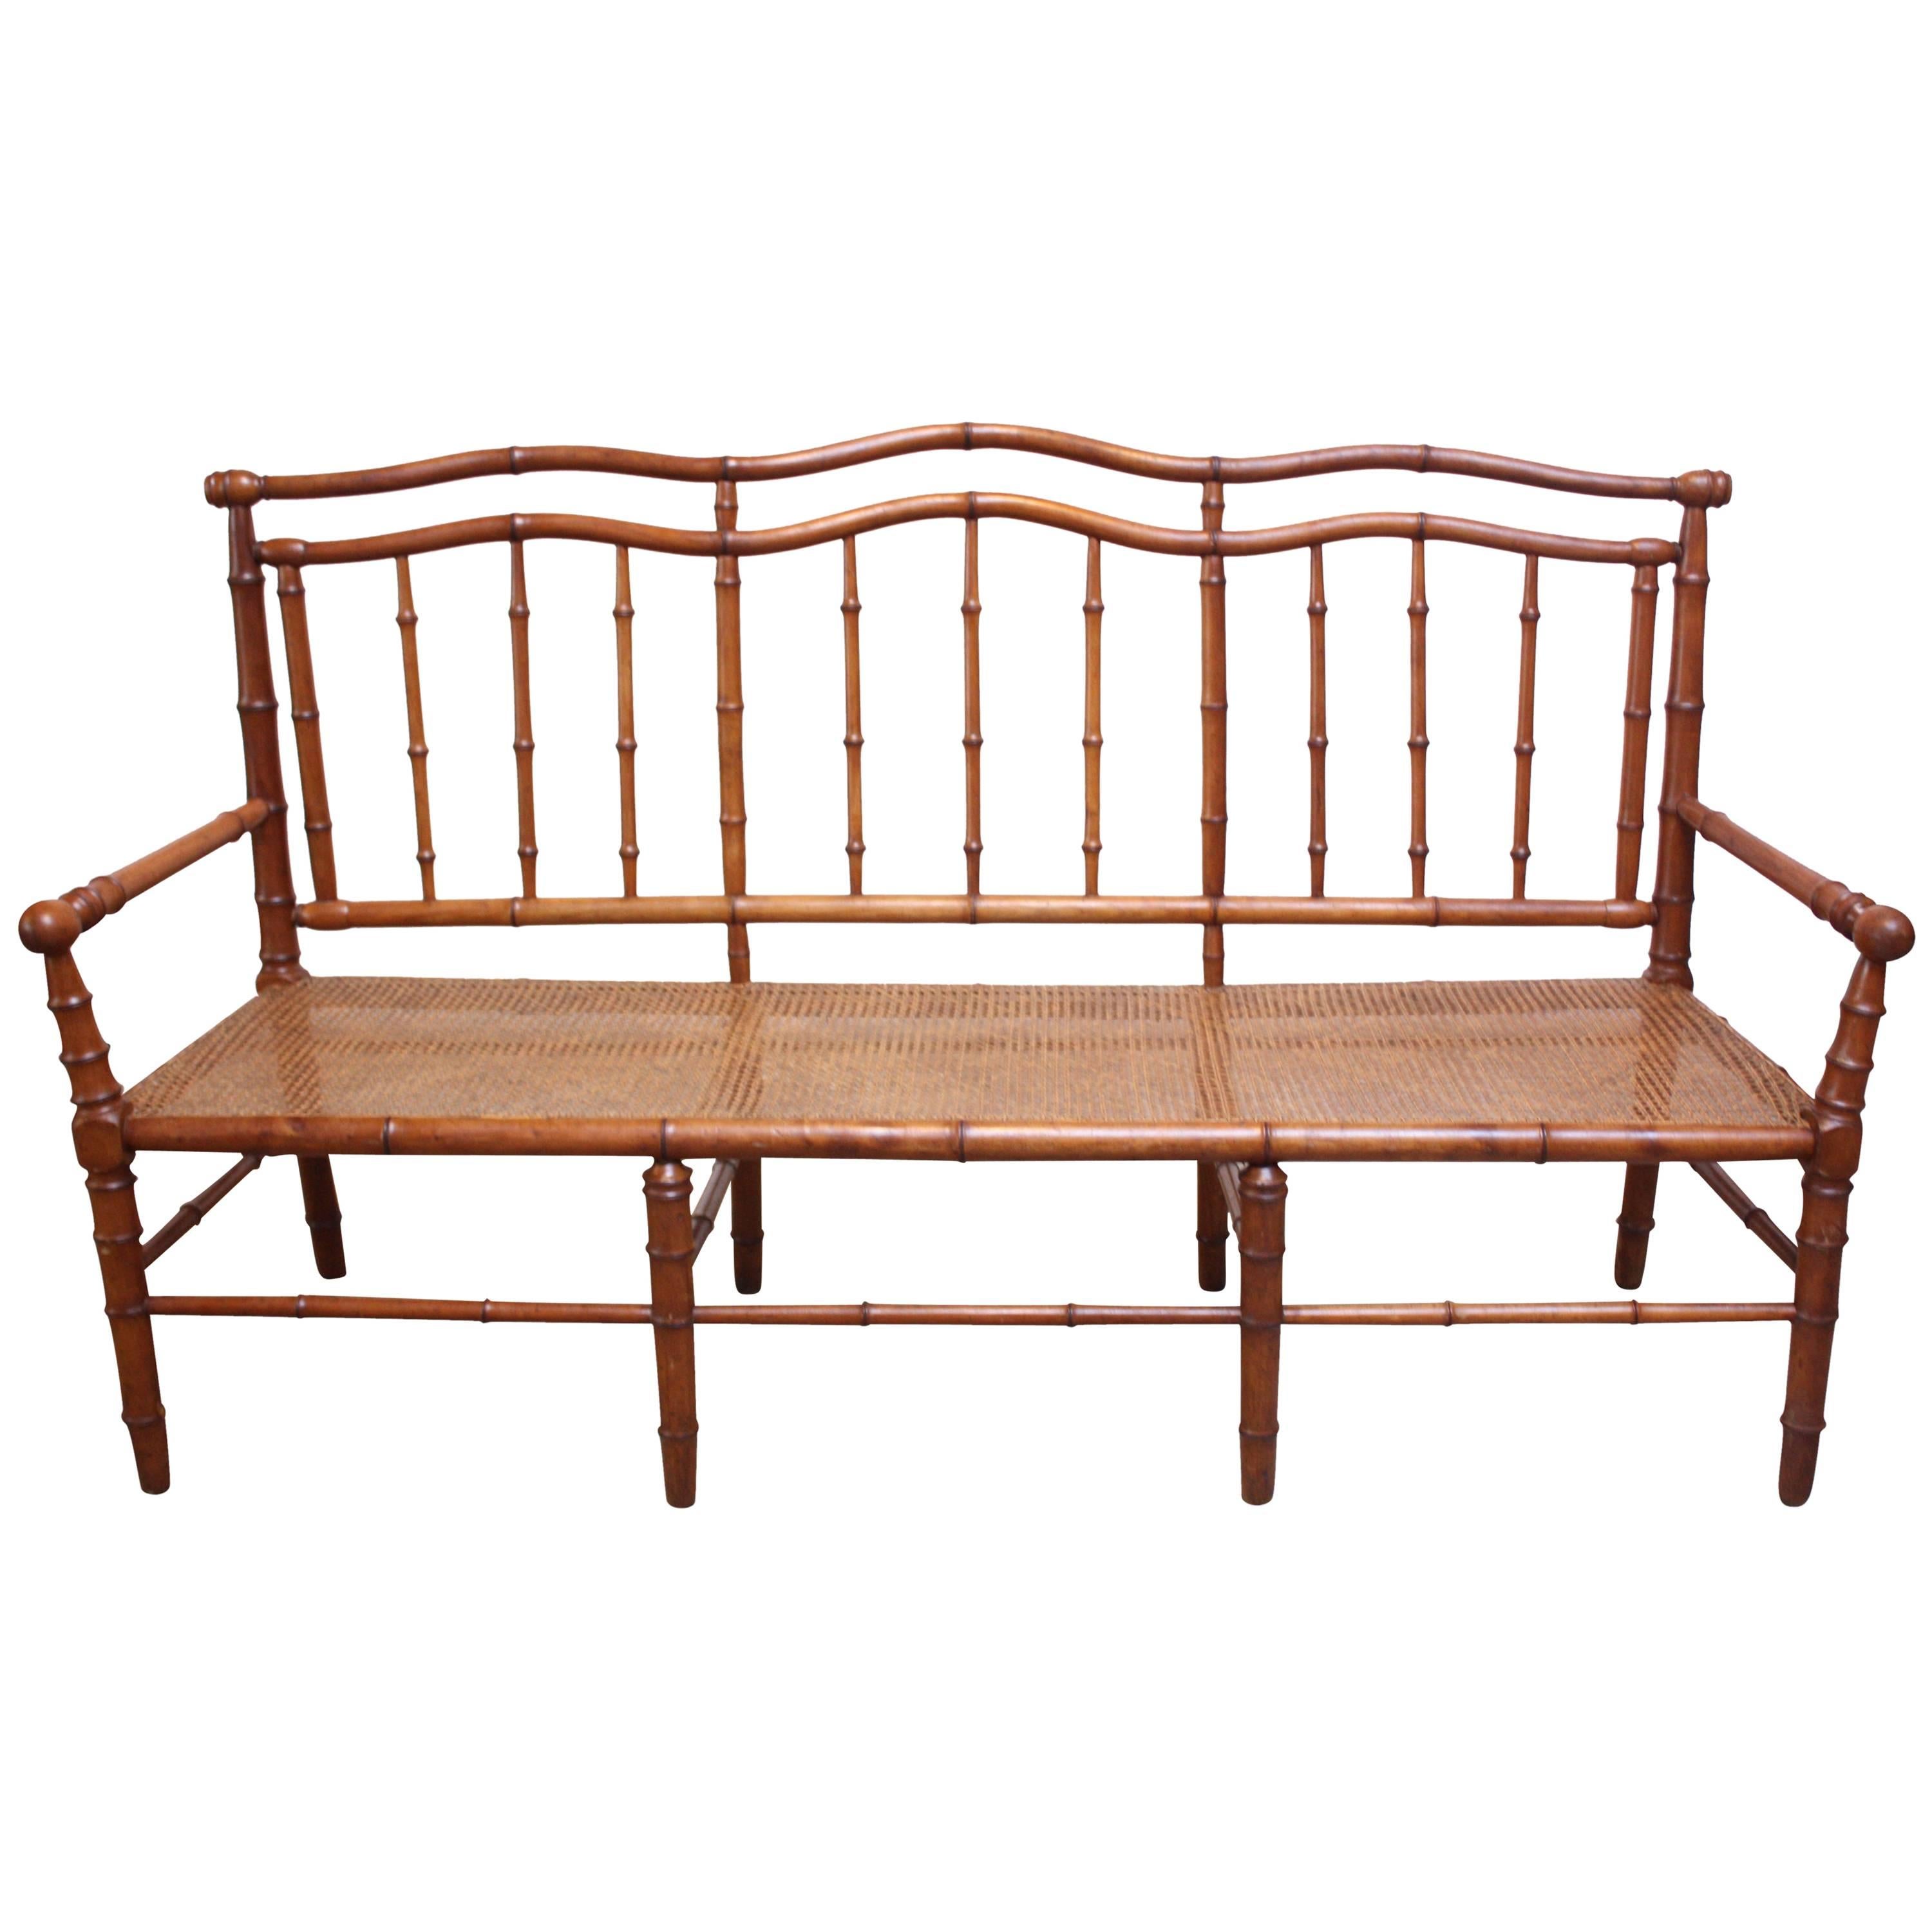 Mid-20th Century Faux-Bamboo Settee Bench in Cherrywood 